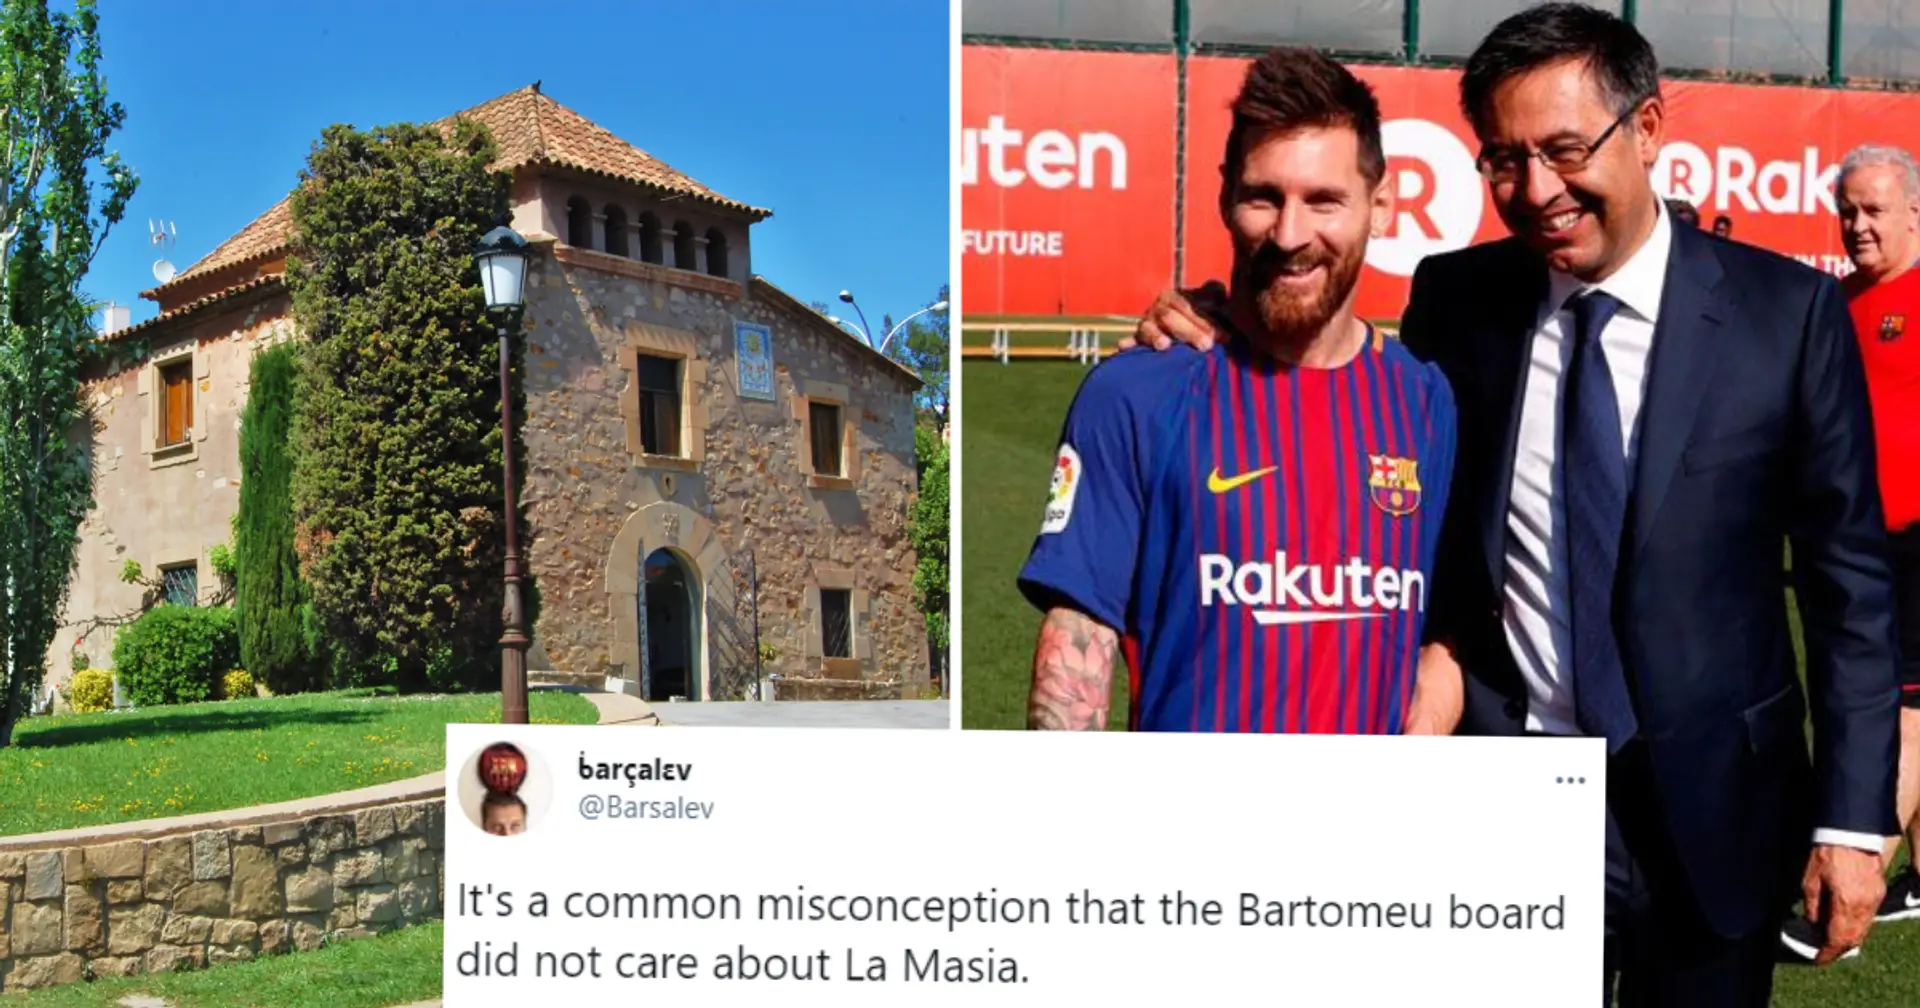 'It's a misconception Bartomeu didn't care about La Masia': Barca fan explains gap in academy prodction, ends on positive note